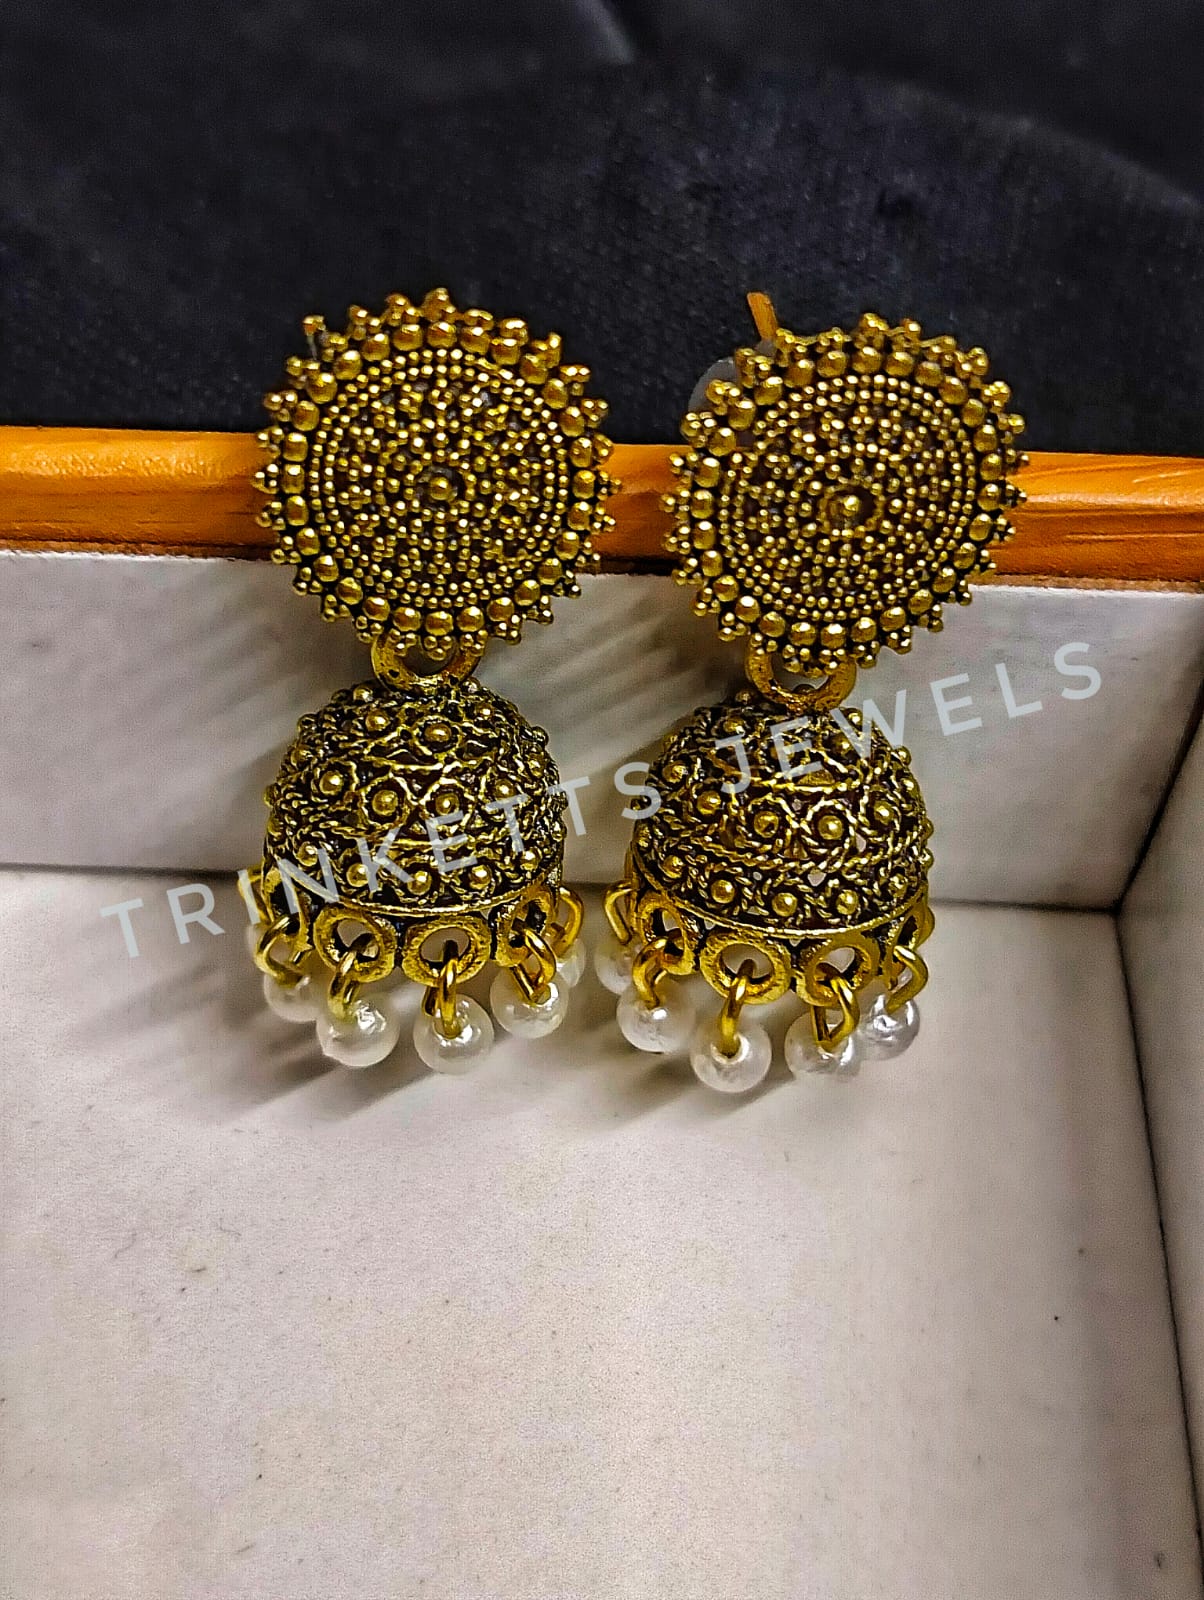 Oxidized golden metal Jhumki earrings, approximately 1.5 inches in size. The design features an intricate circular pattern with a hanging Jhumki plate adorned with white beads. Elegant and timeless, these Jhumkis add a touch of Indian charm to your style